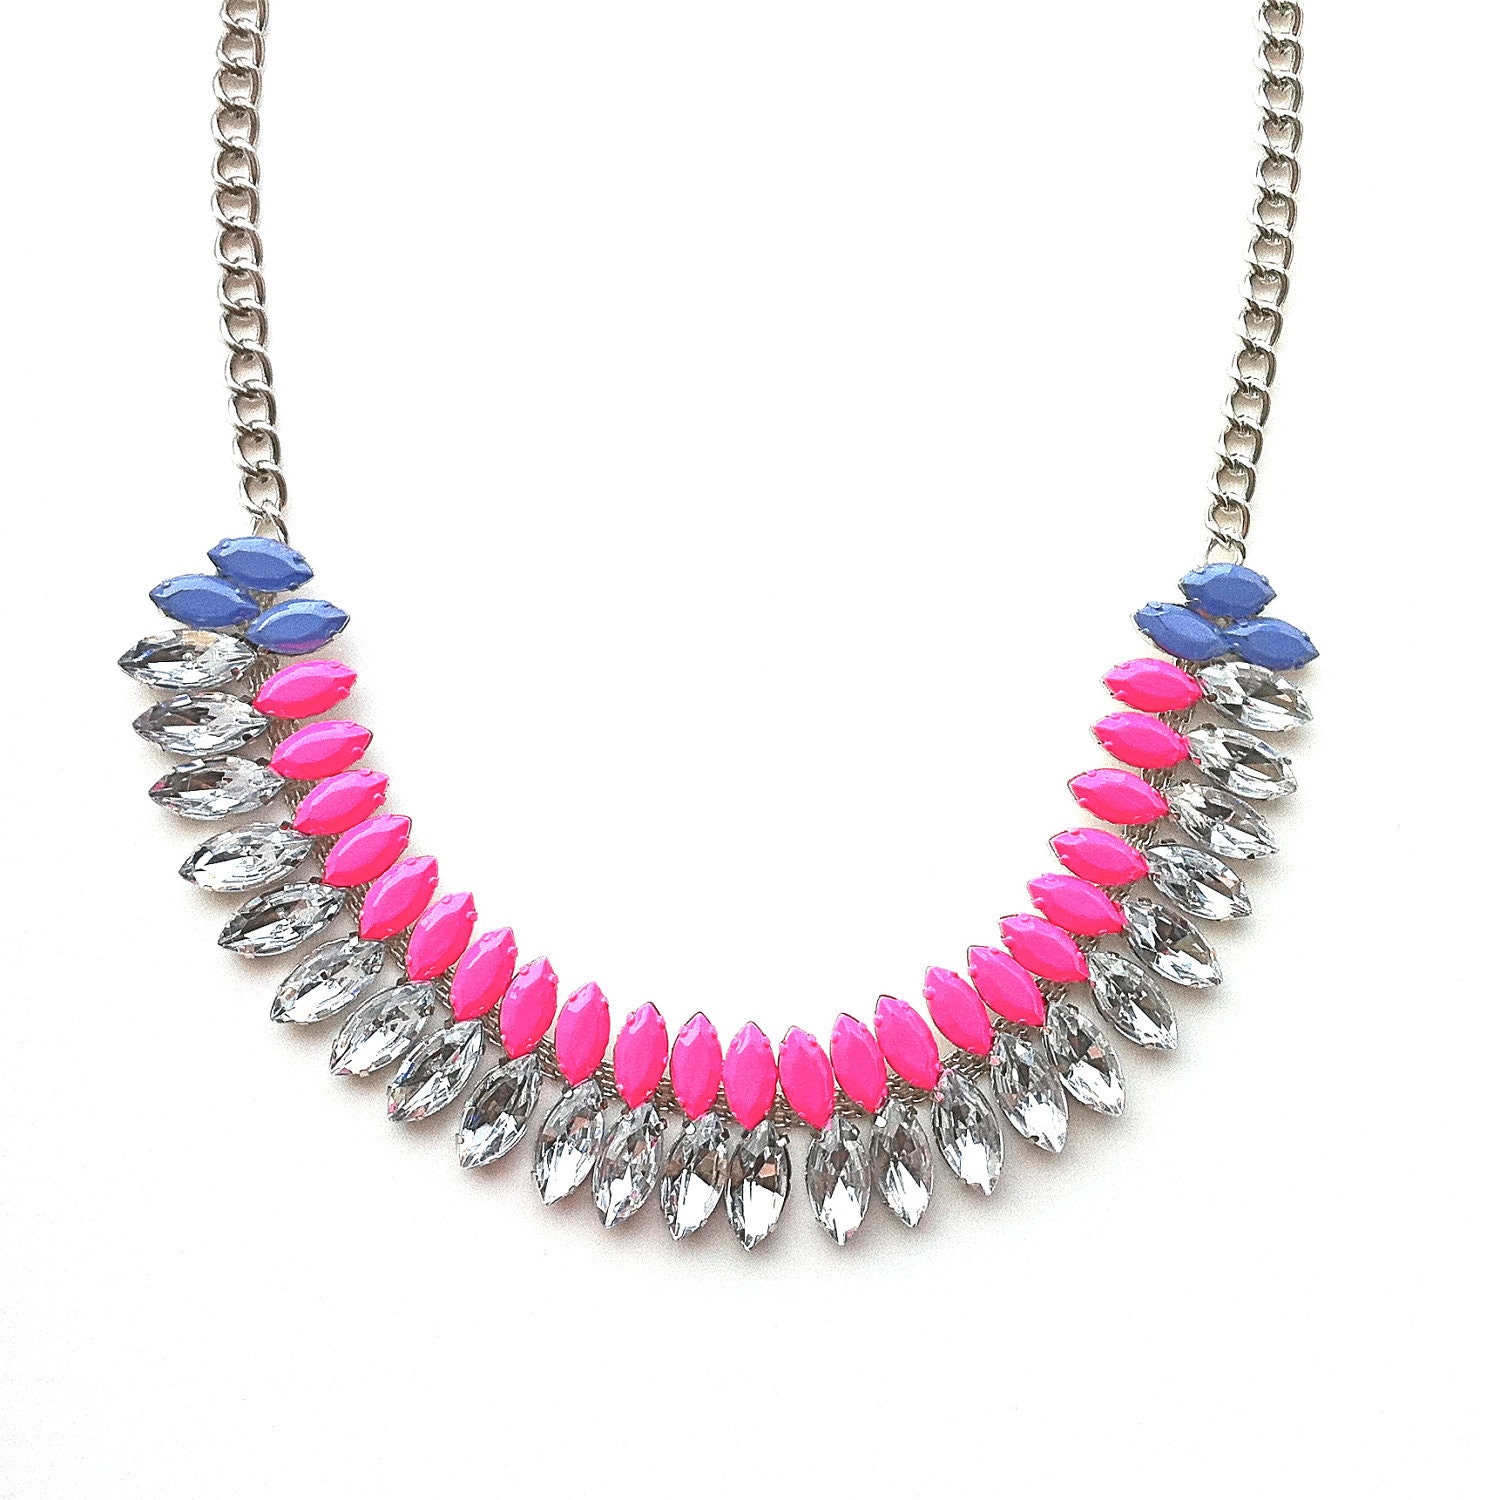 Neon Pink and Periwinkle Hand-painted Crystal Necklace